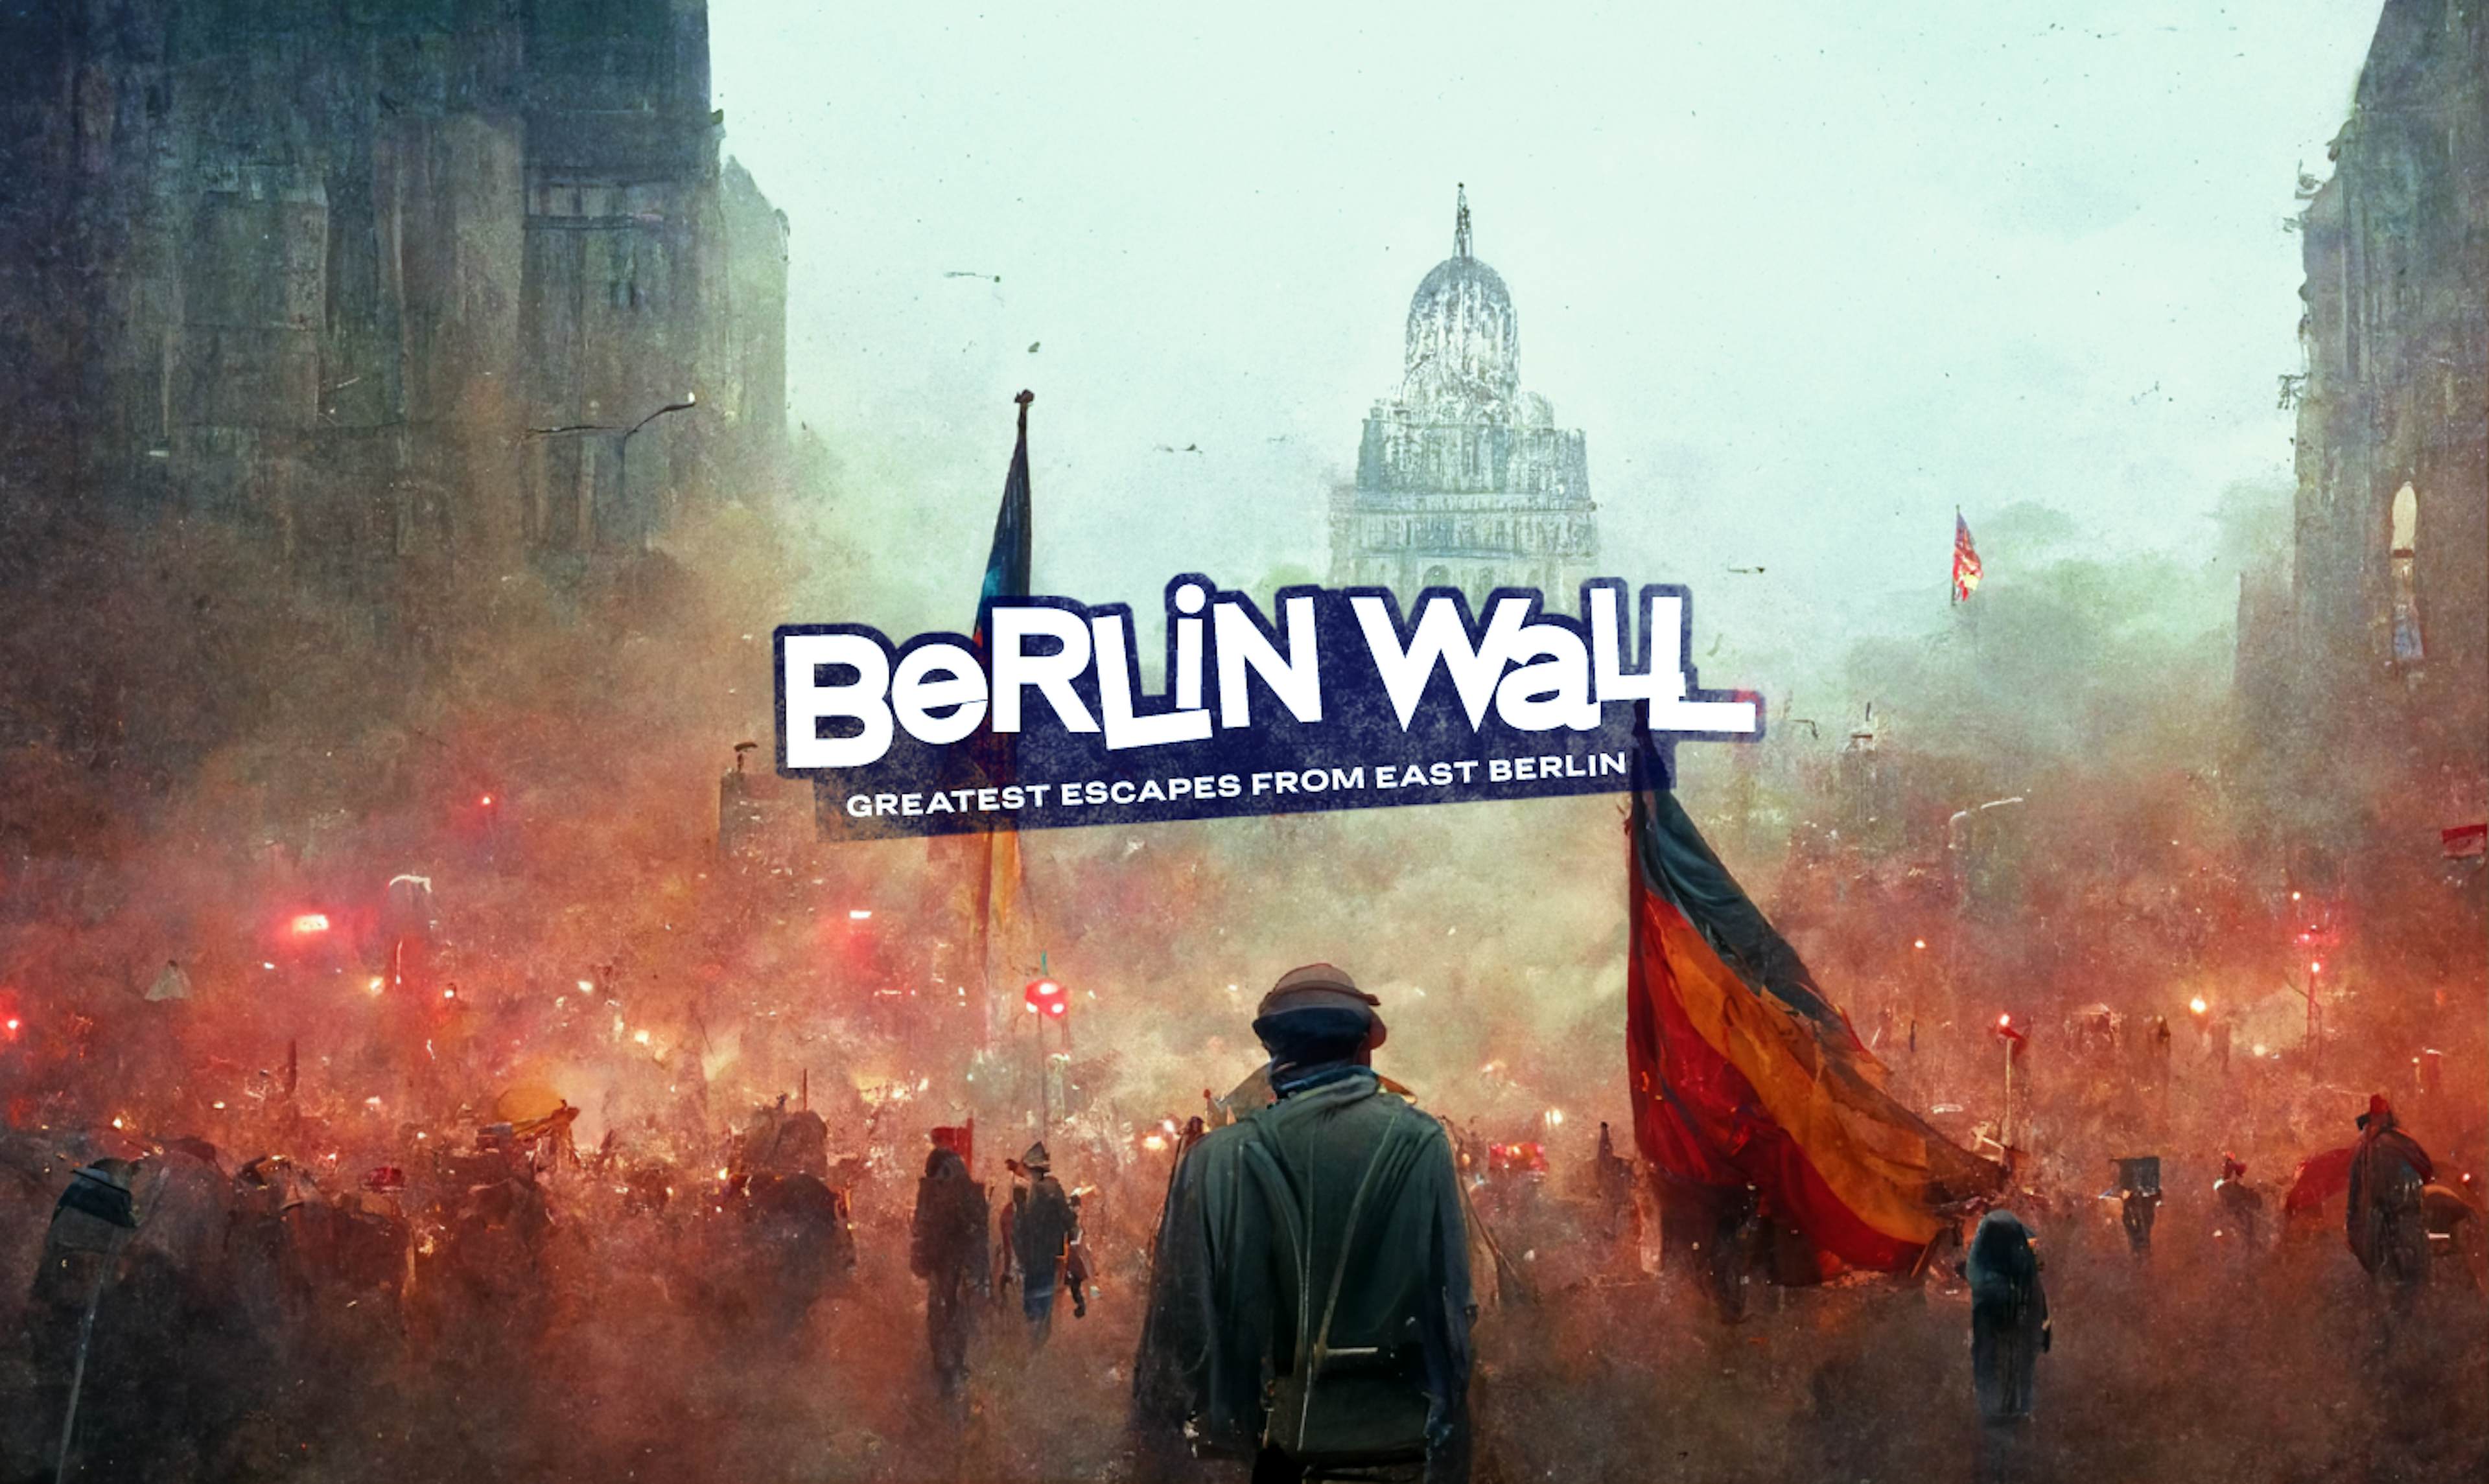 Greatest Escapes from East Berlin